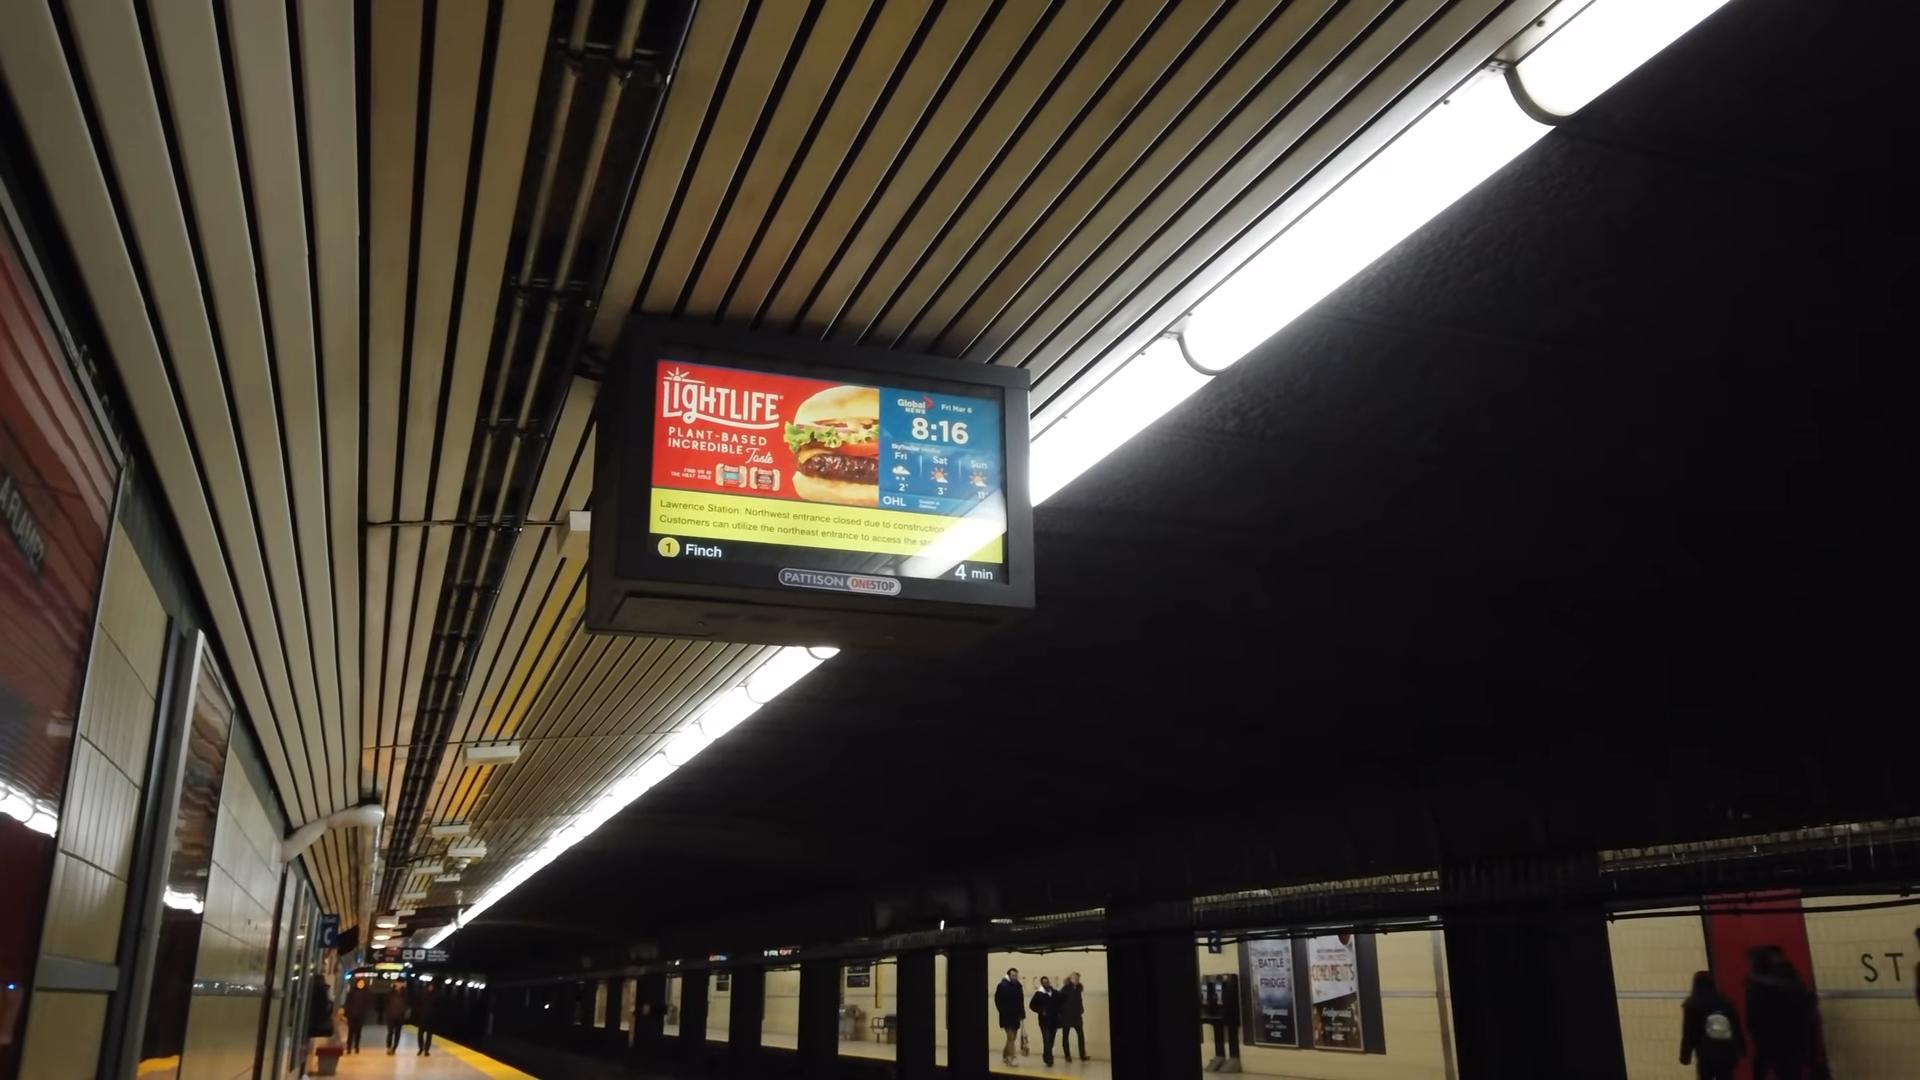 A photo taken inside a subway station. A digital screen hangs from the ceiling. The left two thirds of the screen are an advertisement for a restaurant. The right one third of the screen shows the time of the next arriving train and the weather.